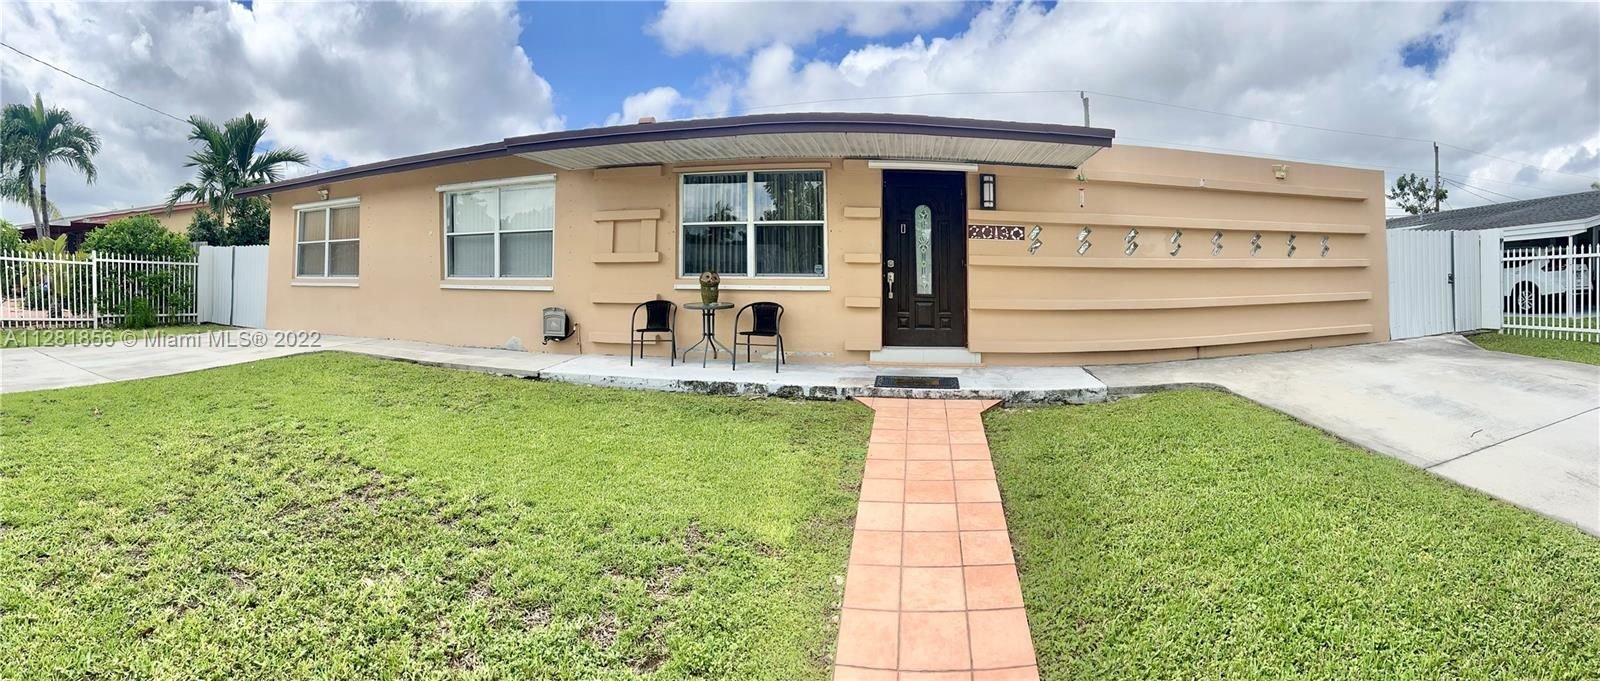 Real estate property located at 20130 106th Ave, Miami-Dade County, Cutler Bay, FL